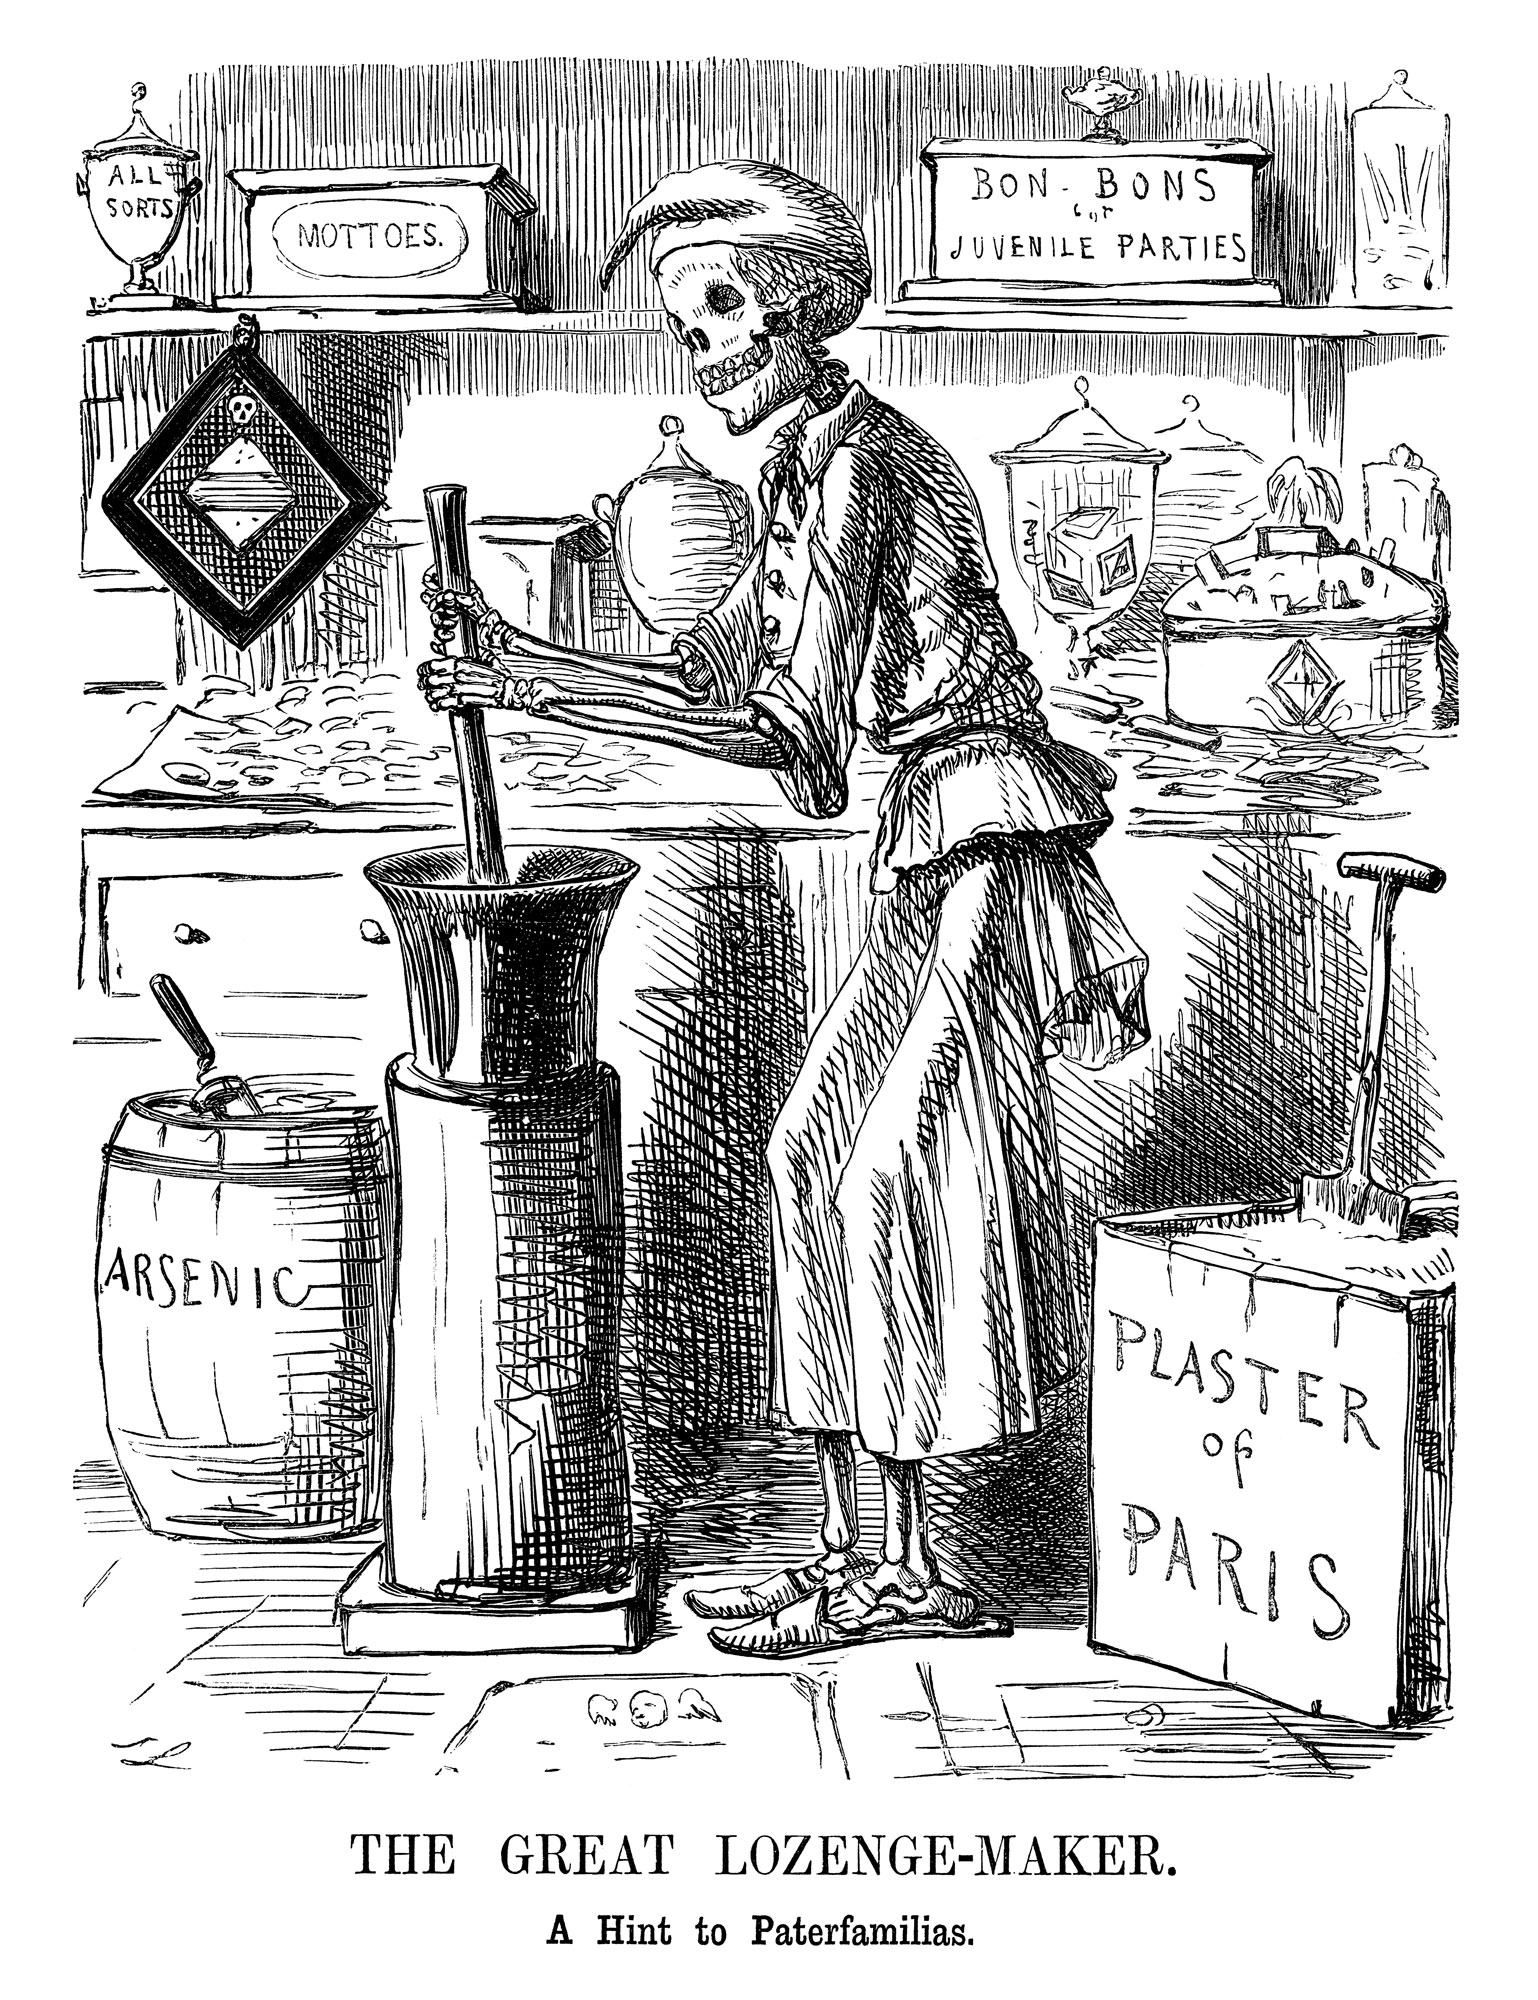 The_Great_Lozenge-Maker_A_Hint_to_Paterfamilias, cartoon, arsenic poisoning